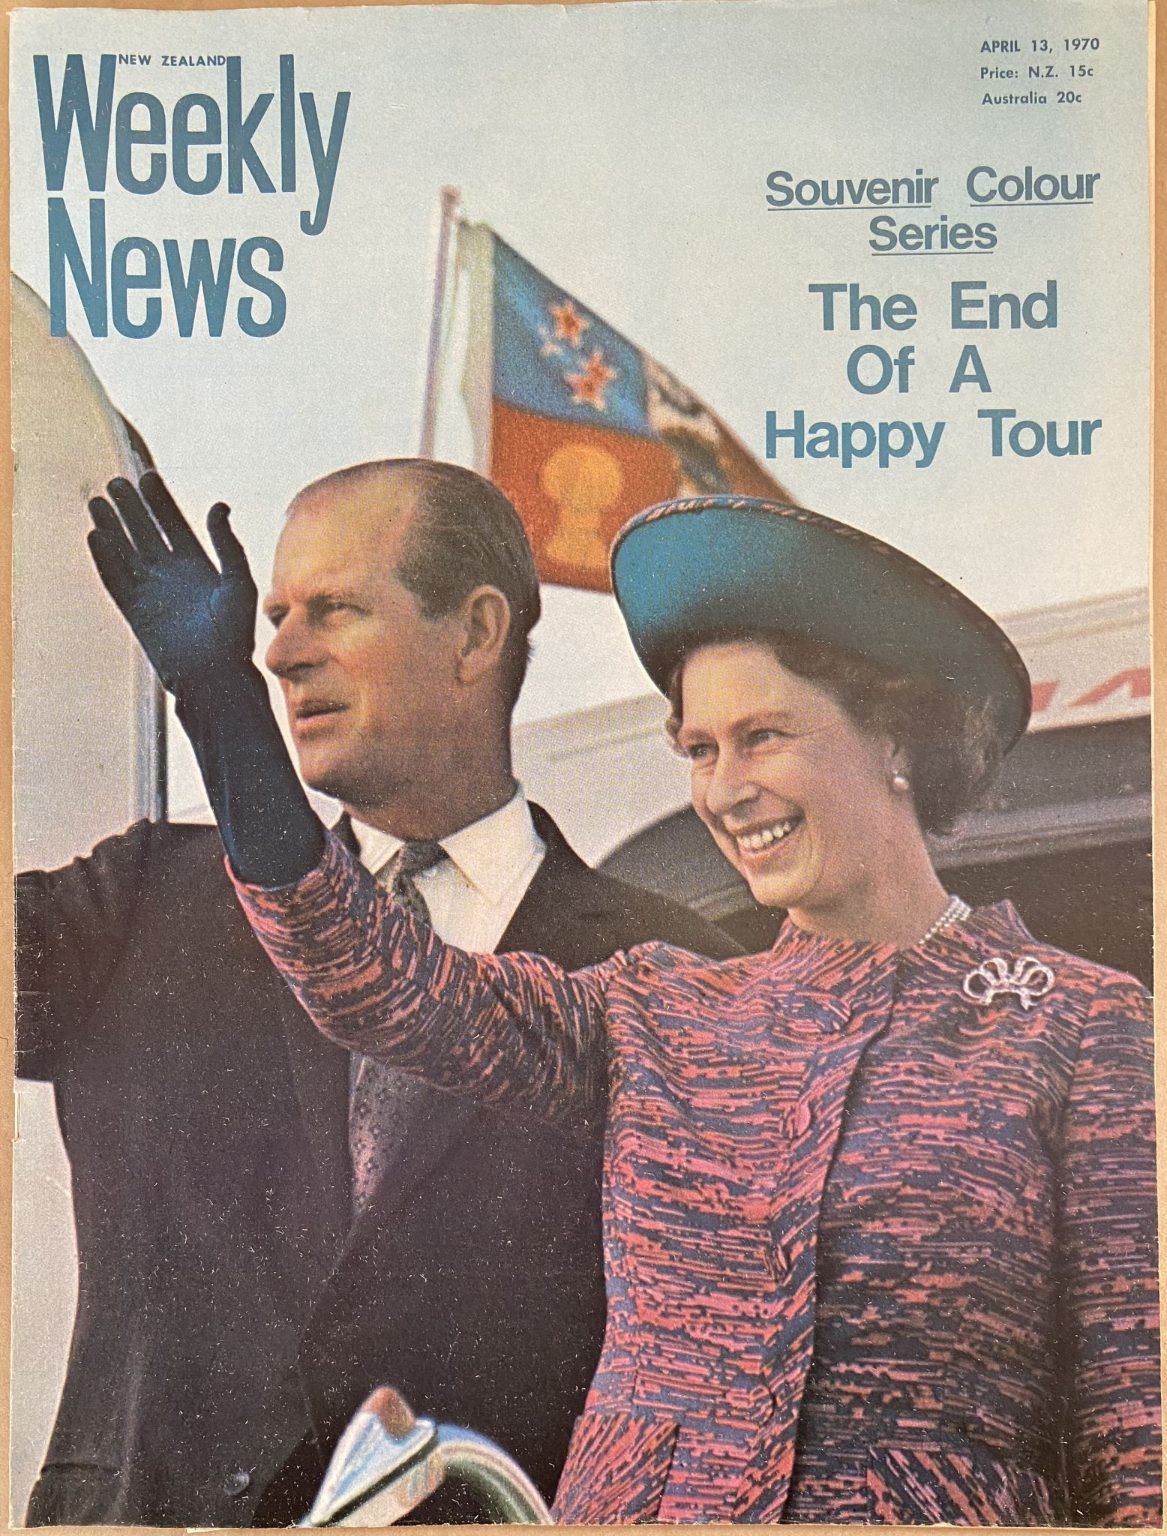 OLD NEWSPAPER: New Zealand Weekly News, No. 5549, 13 April 1970